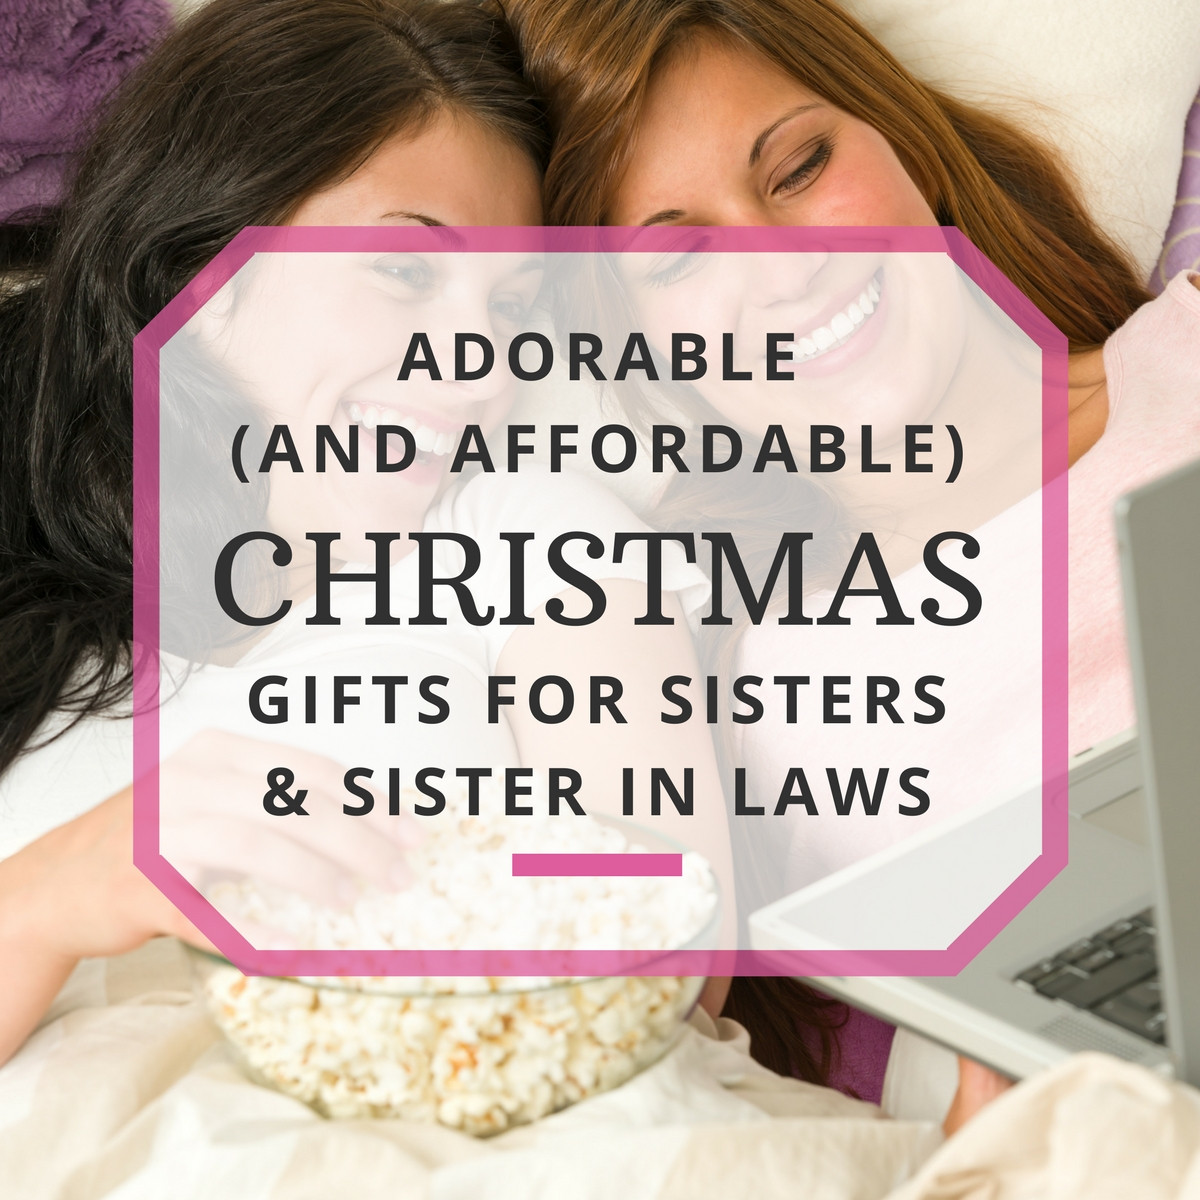 Christmas Gift Ideas For Sister
 Adorable and Affordable Christmas Gifts for Sisters